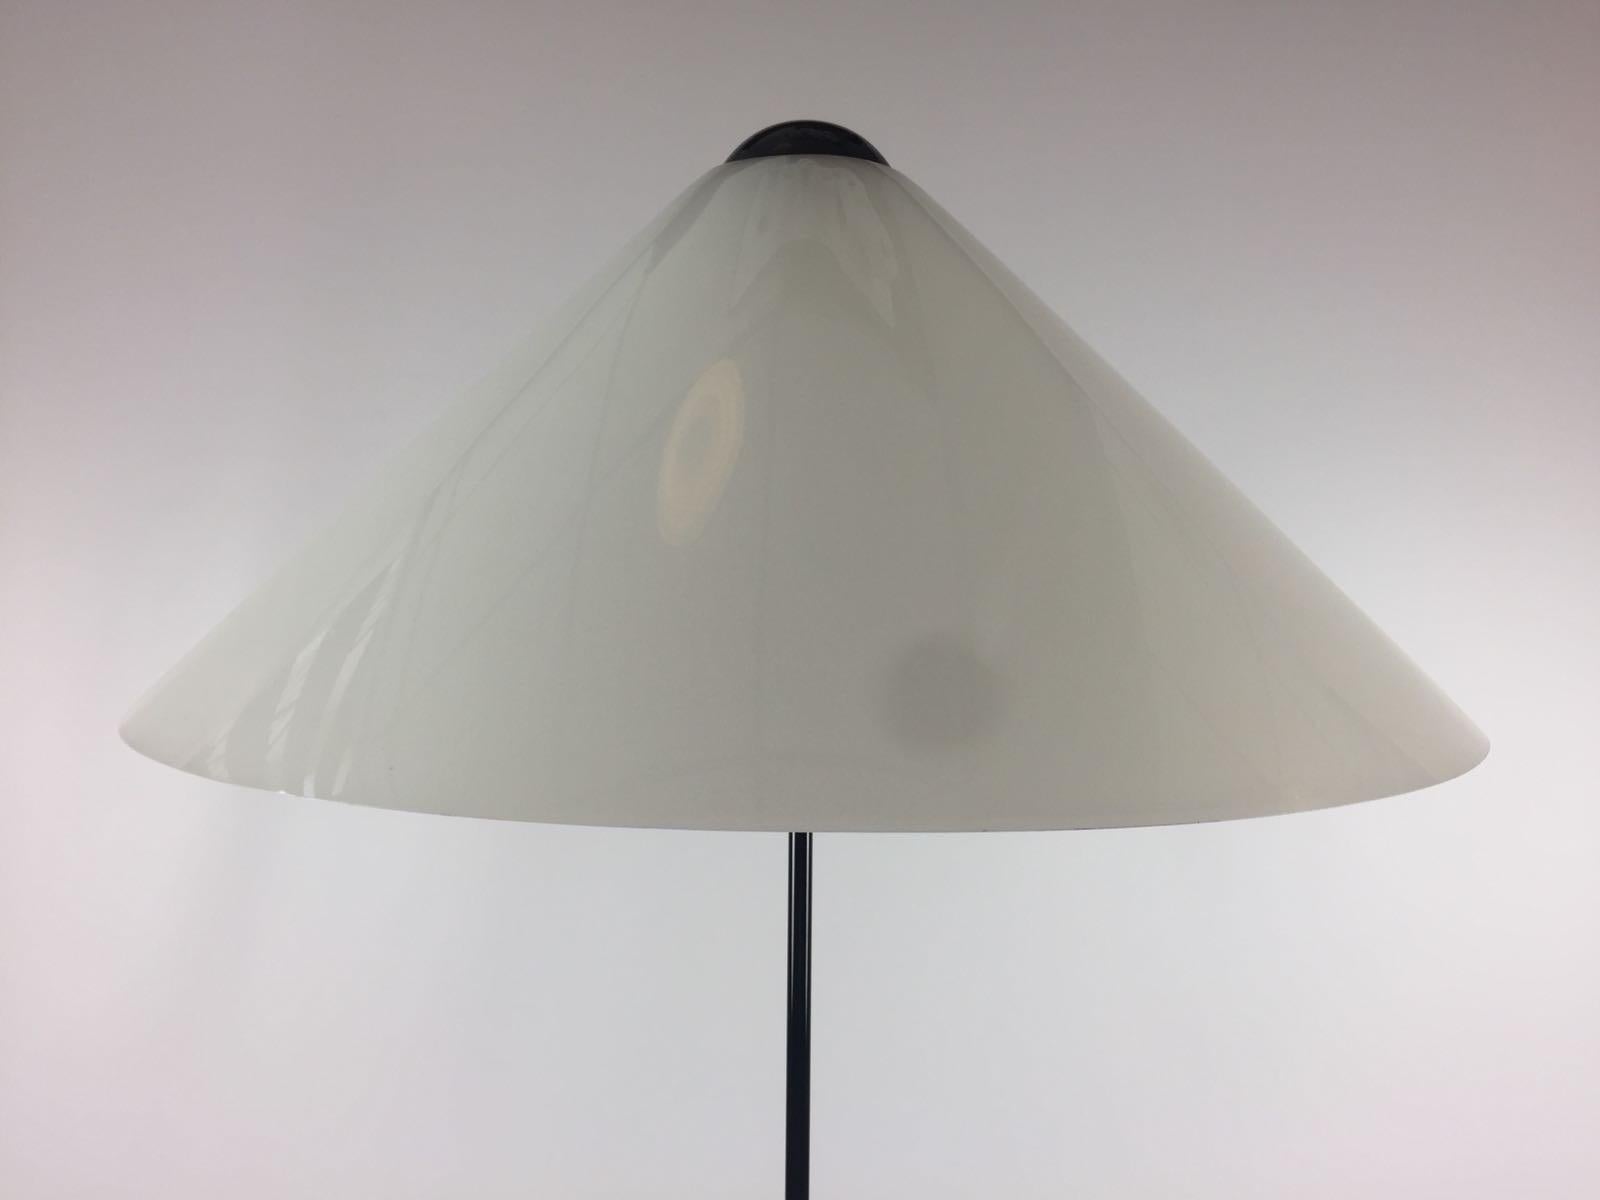 Vico Magistretti 'Snow' Floor Lamp for Oluce, Italy, 1973 For Sale 5